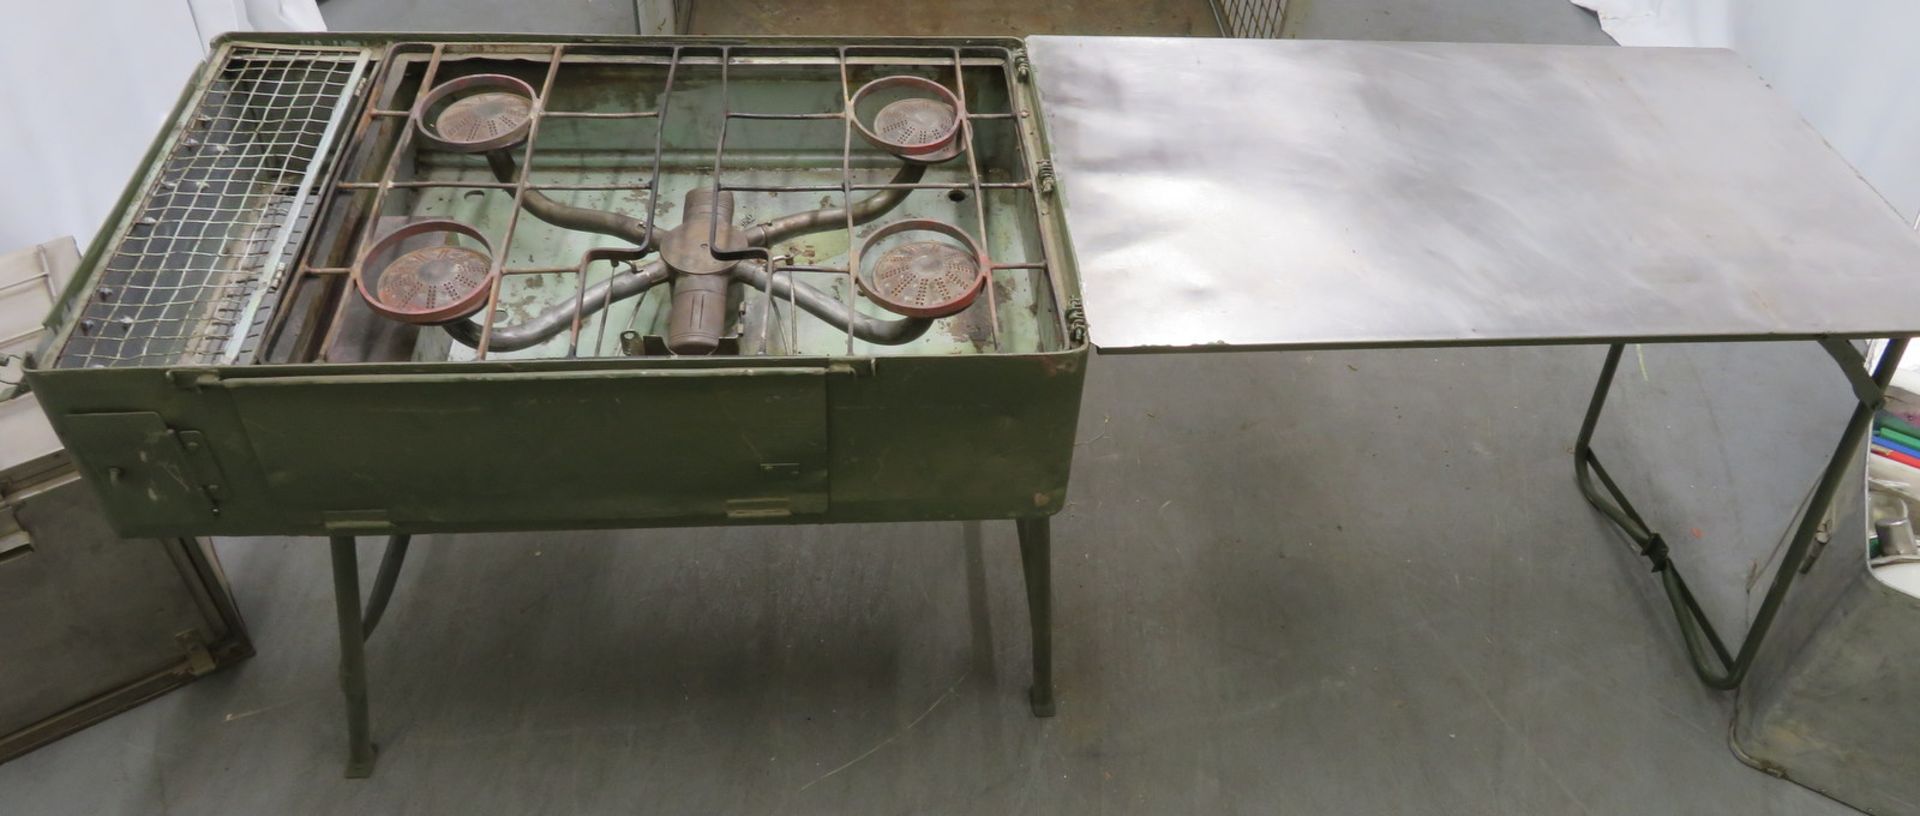 British Army No 5 field cooker & G1 No 5 hot box field oven set. - Image 3 of 18